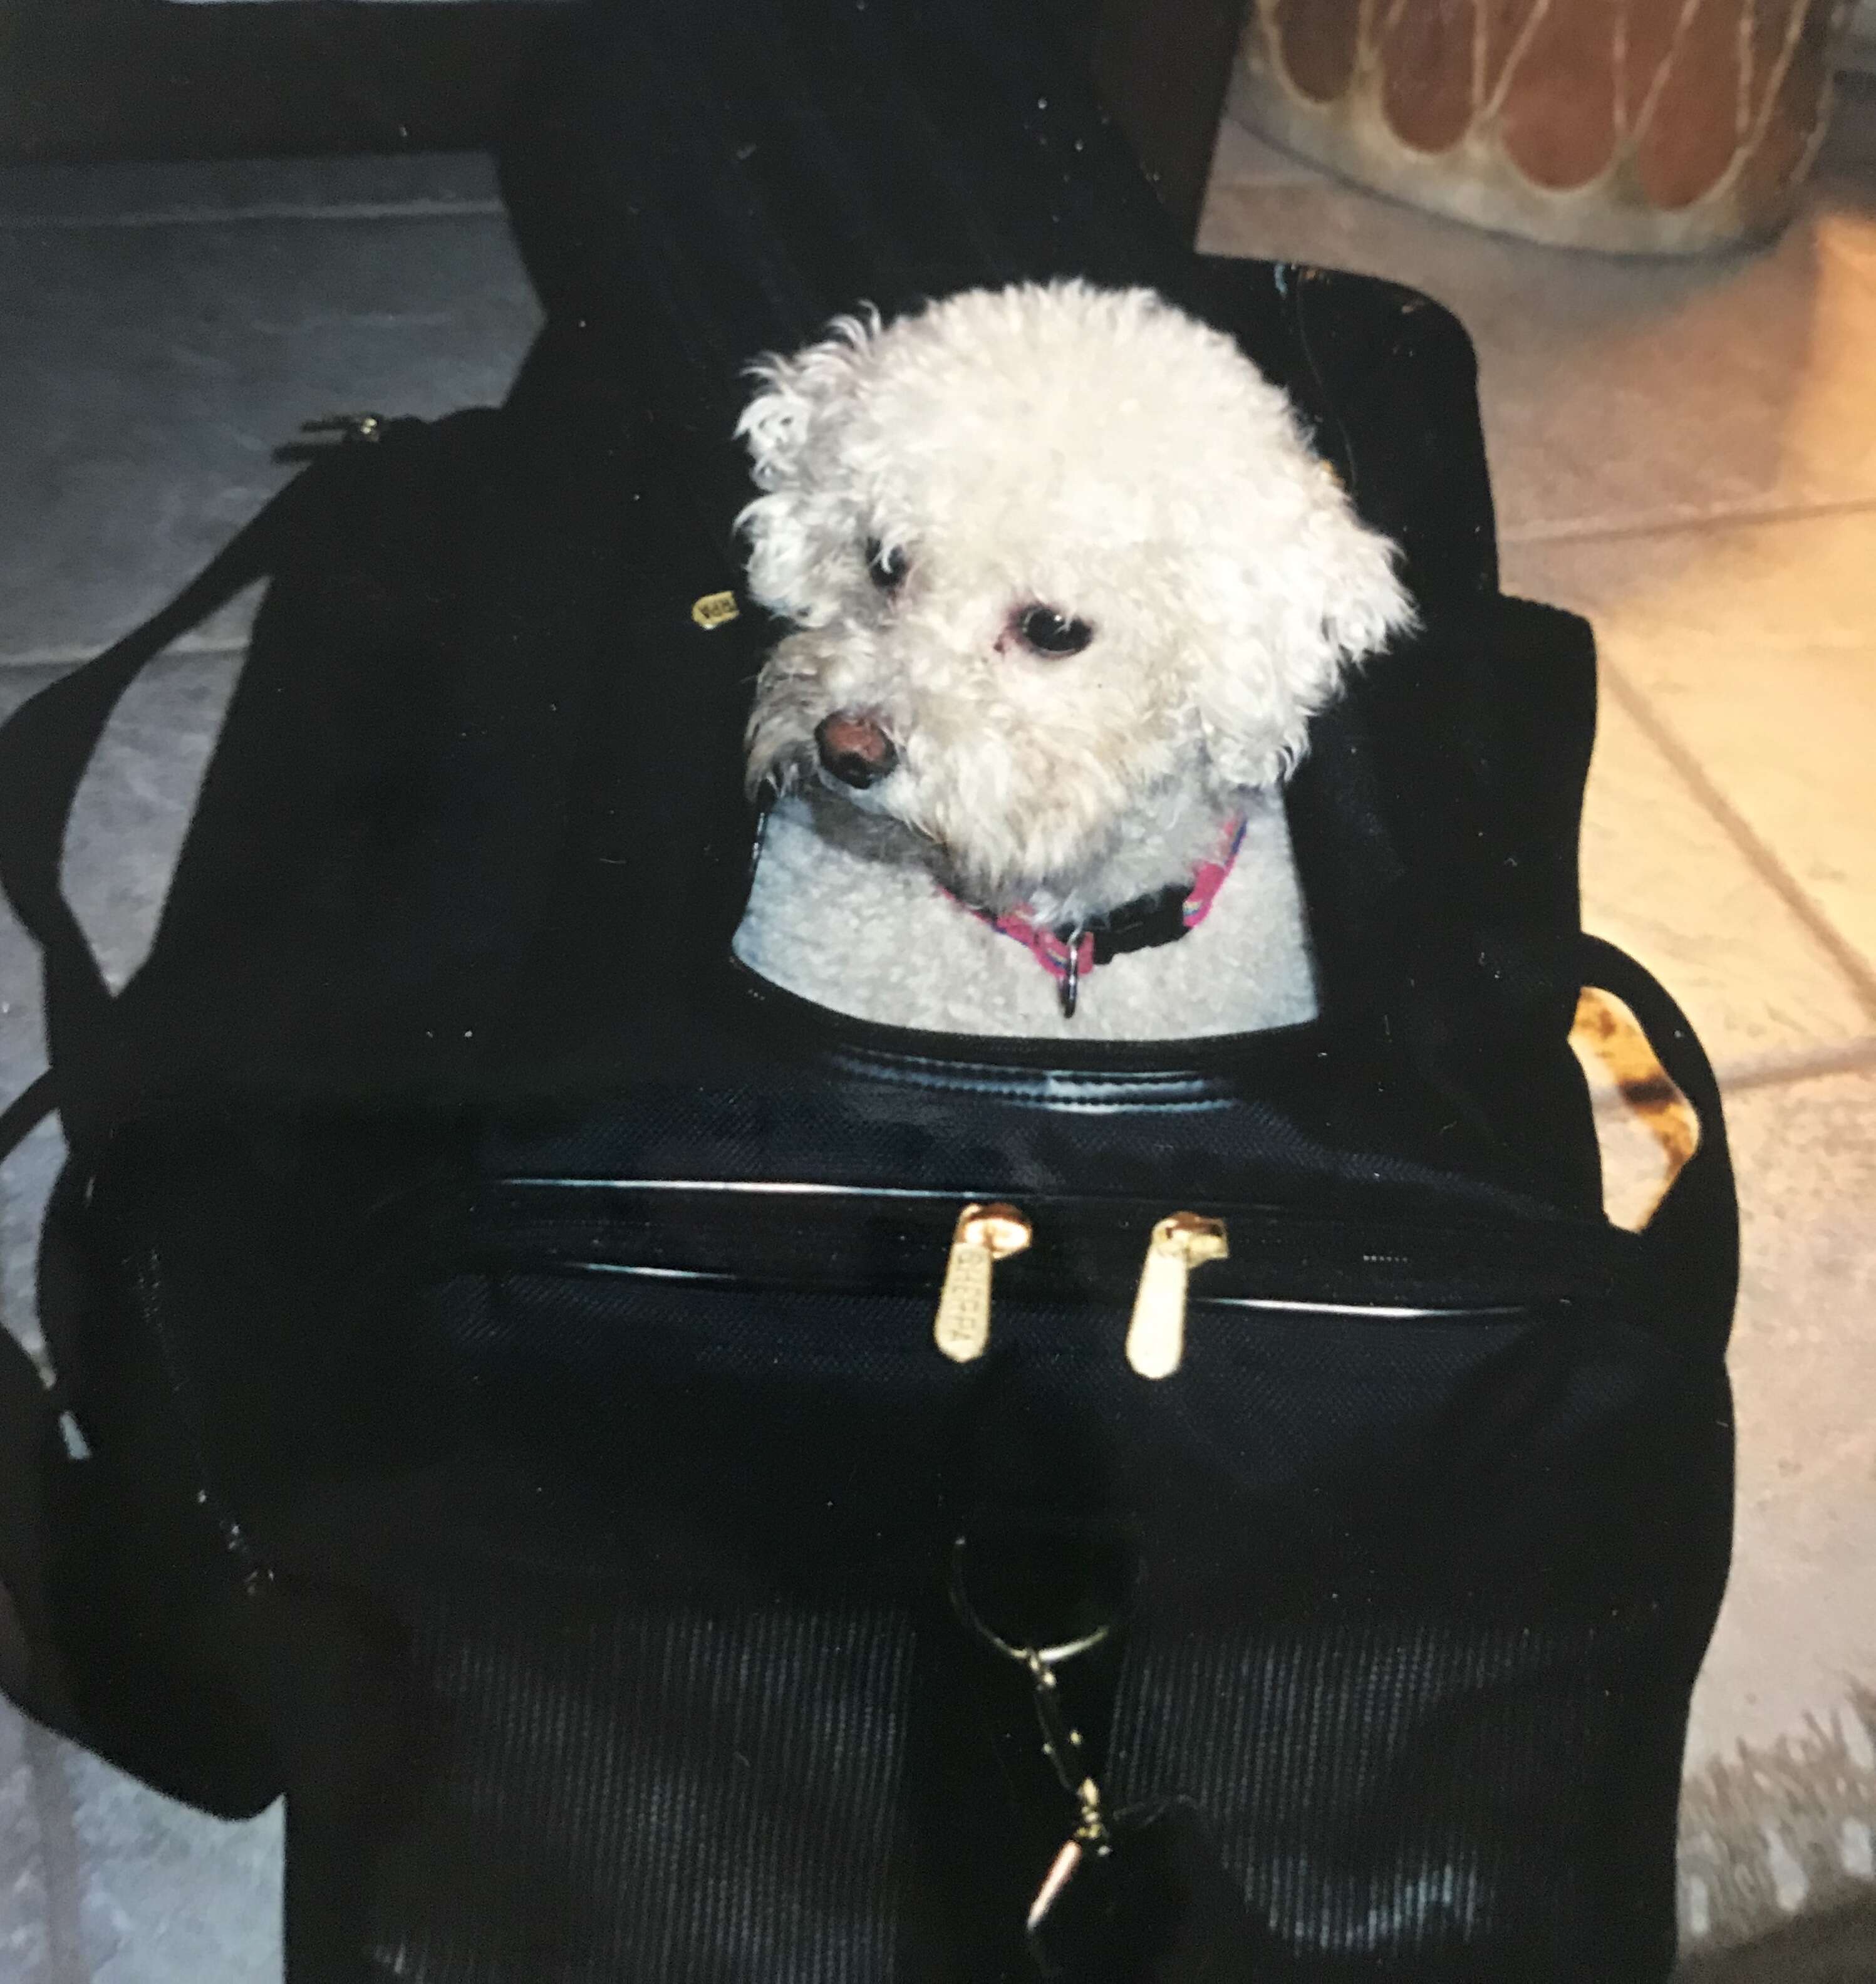 A Bichon Frise in his carrying case in new york city